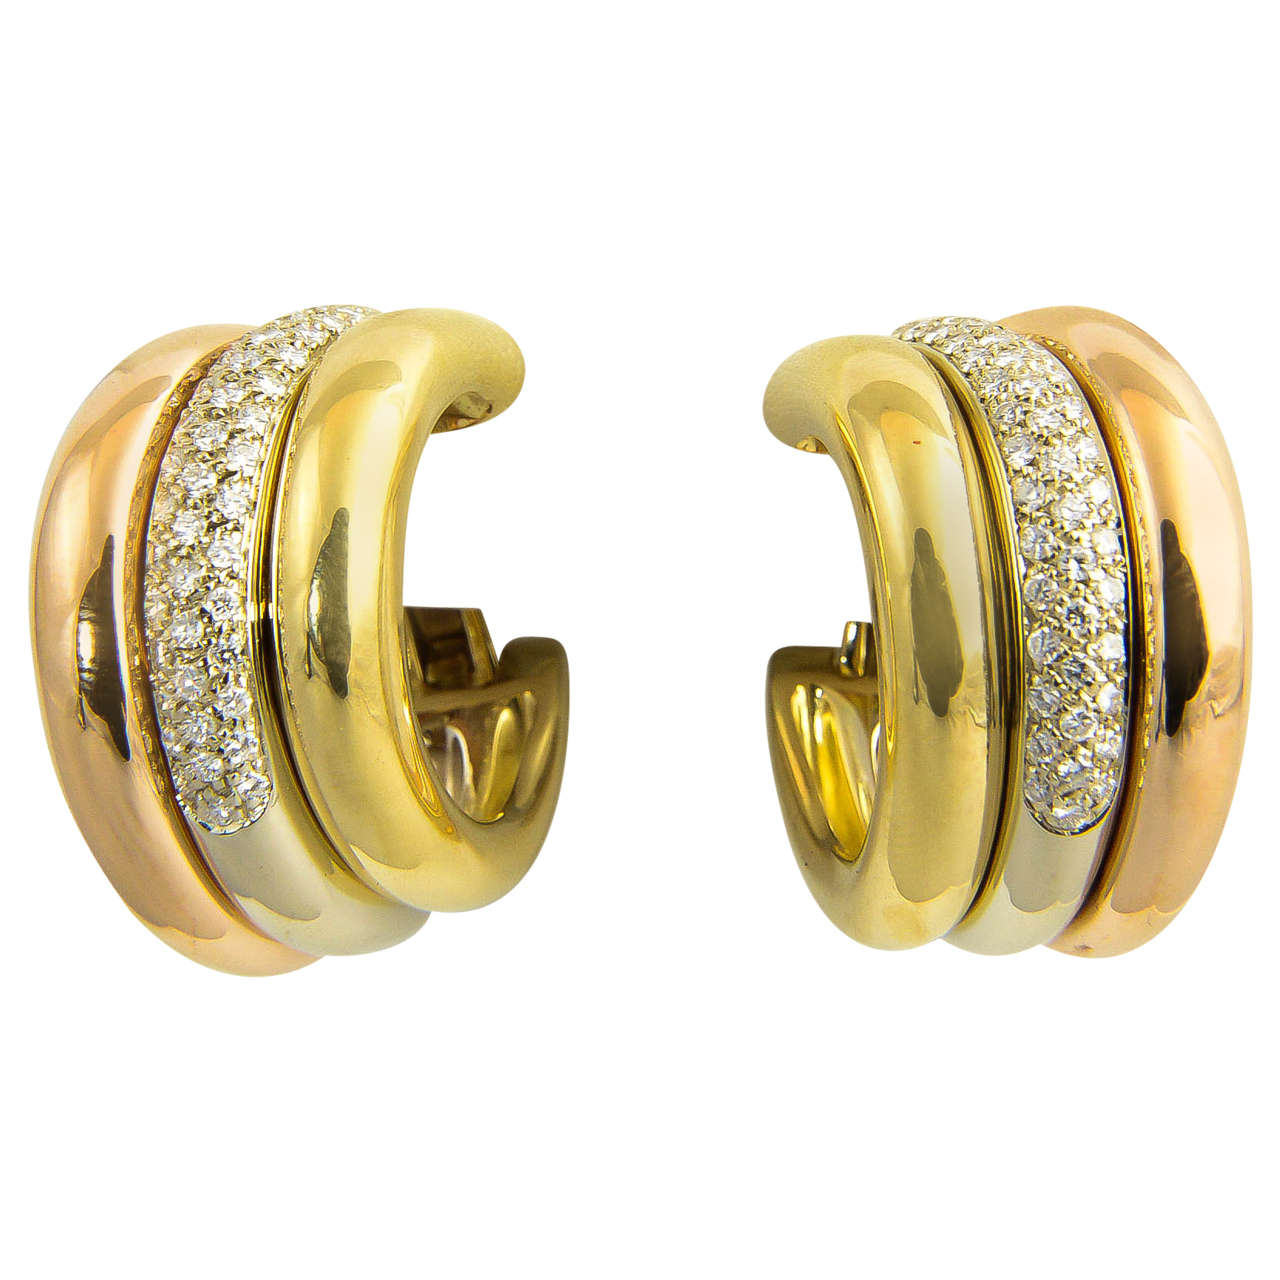 1970's Cartier Diamond and Tri- Color Gold Hoop Earrings